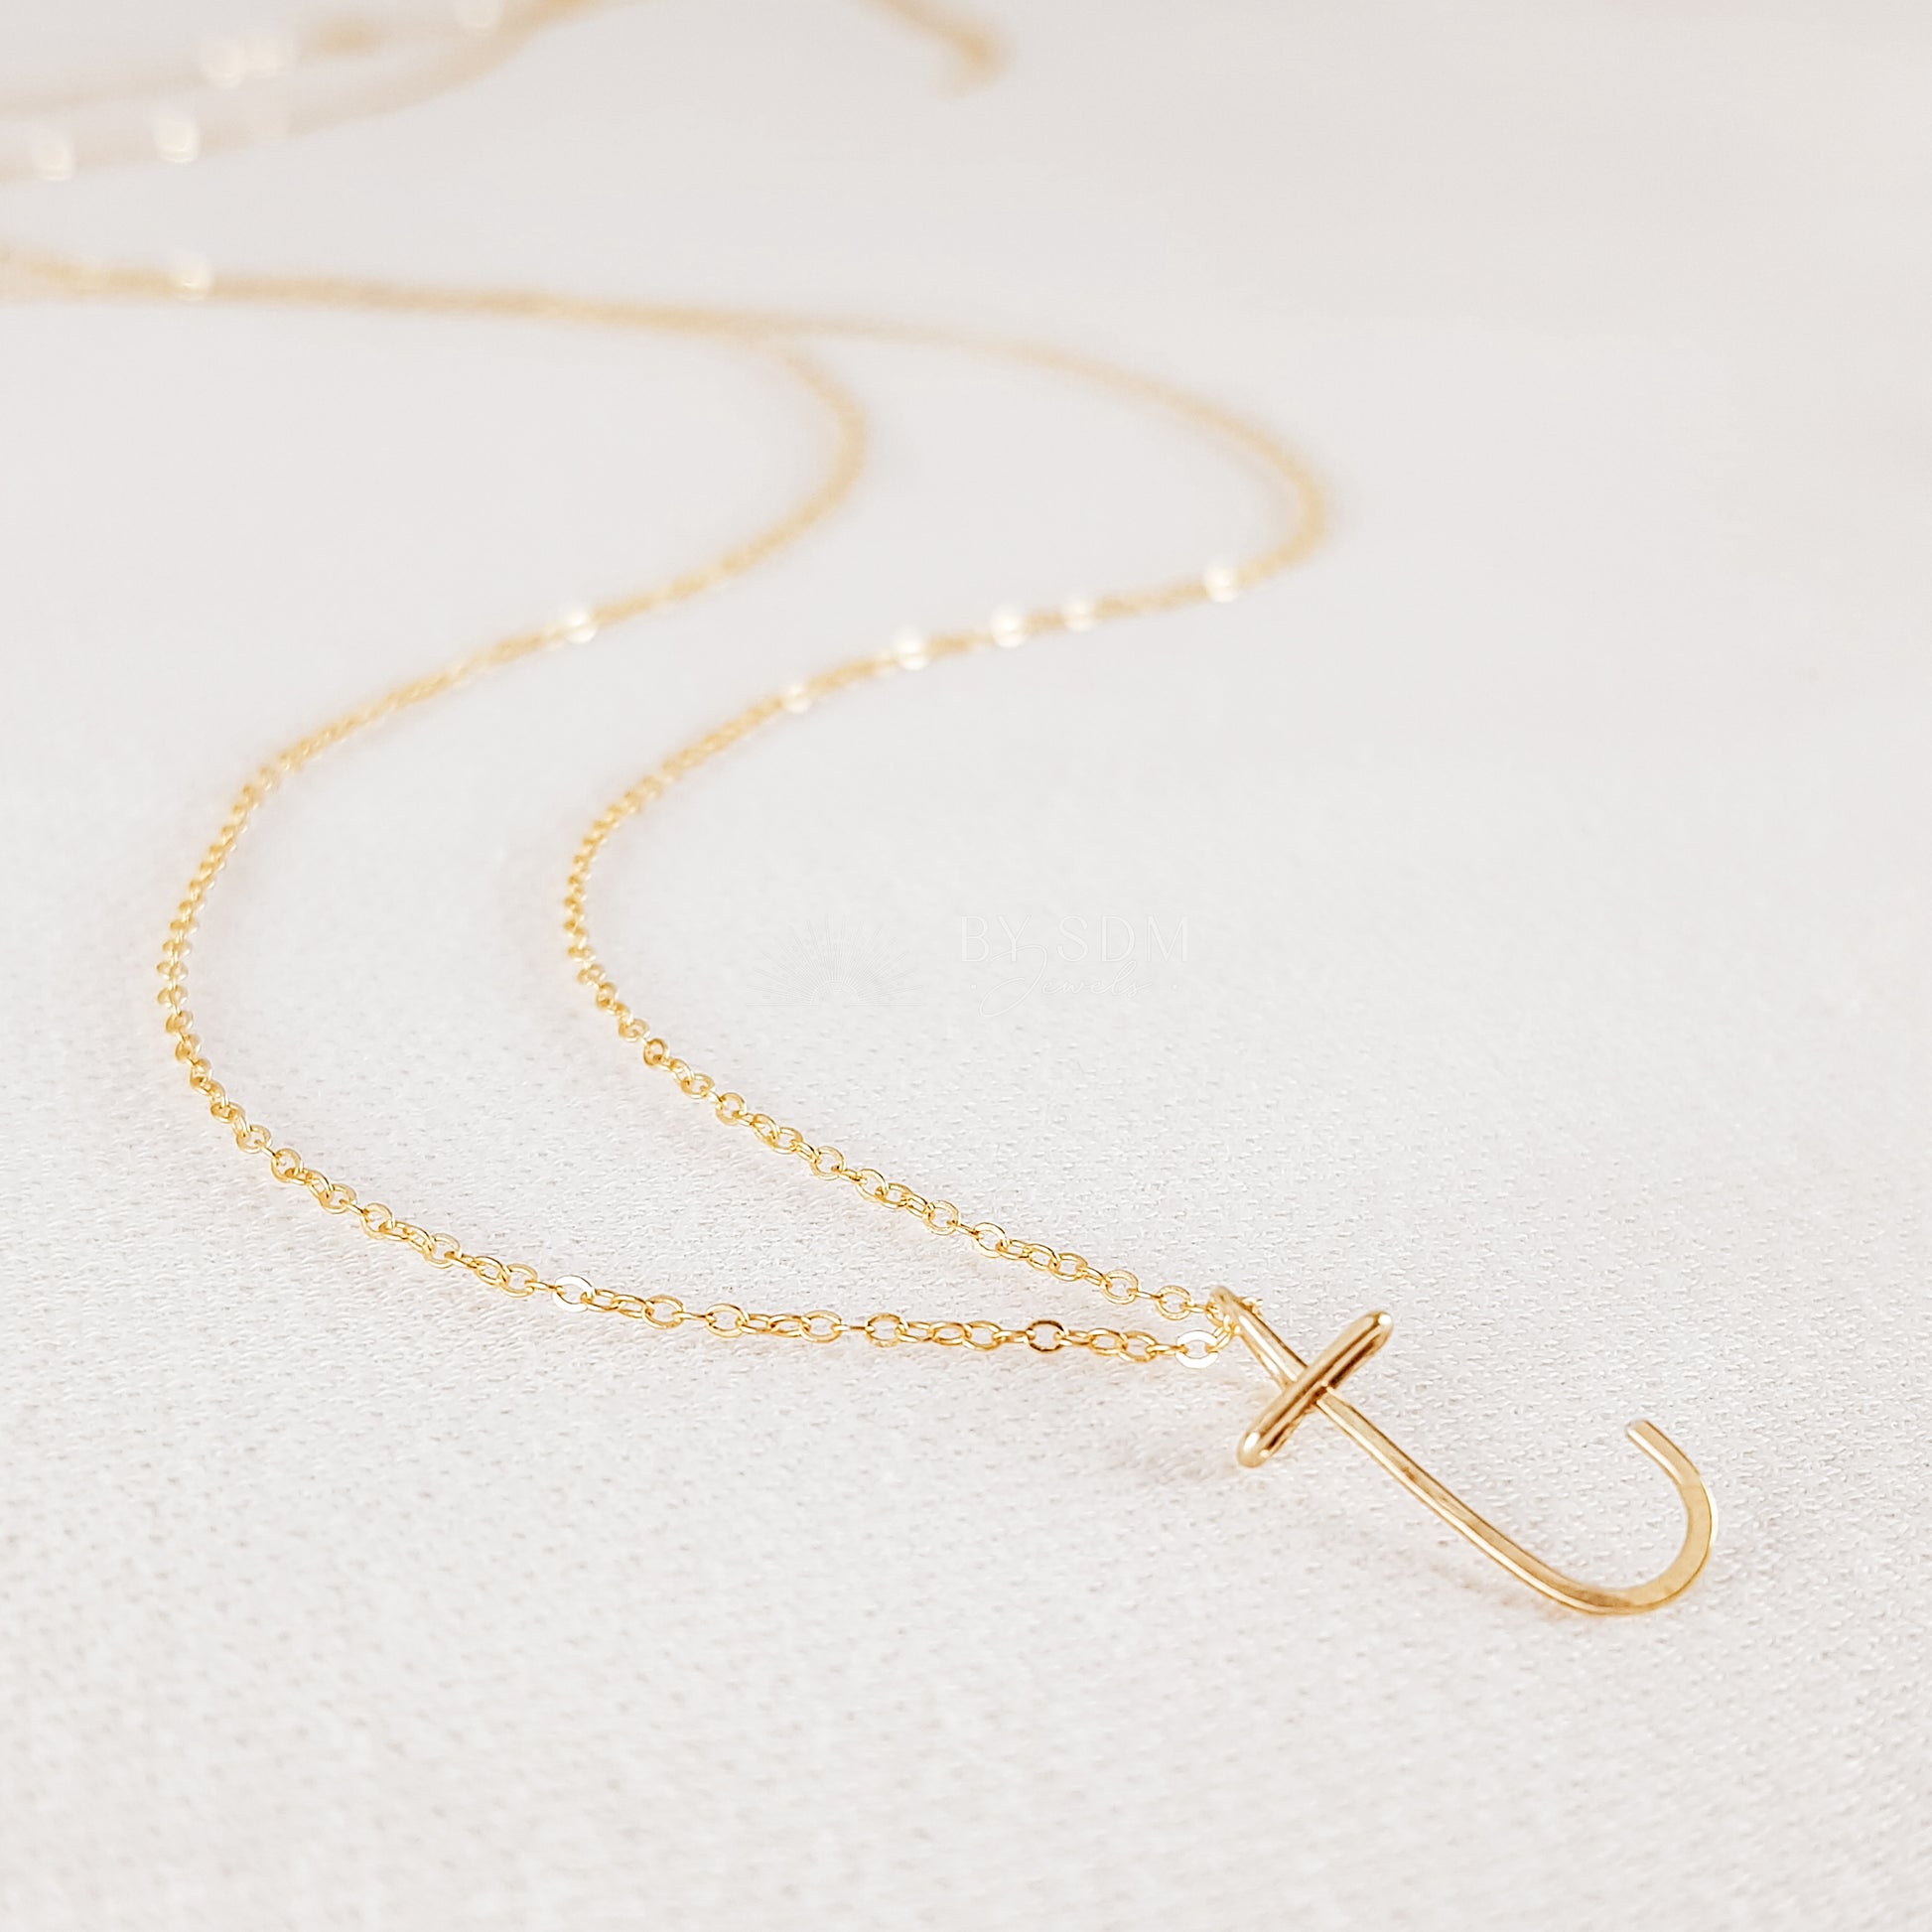 W Initial Necklace • Personalized Name Necklace • Letter Necklace • Gold Necklace • Wife Gifts • Gifts For Mom • Moms Gift • Birthday Gift